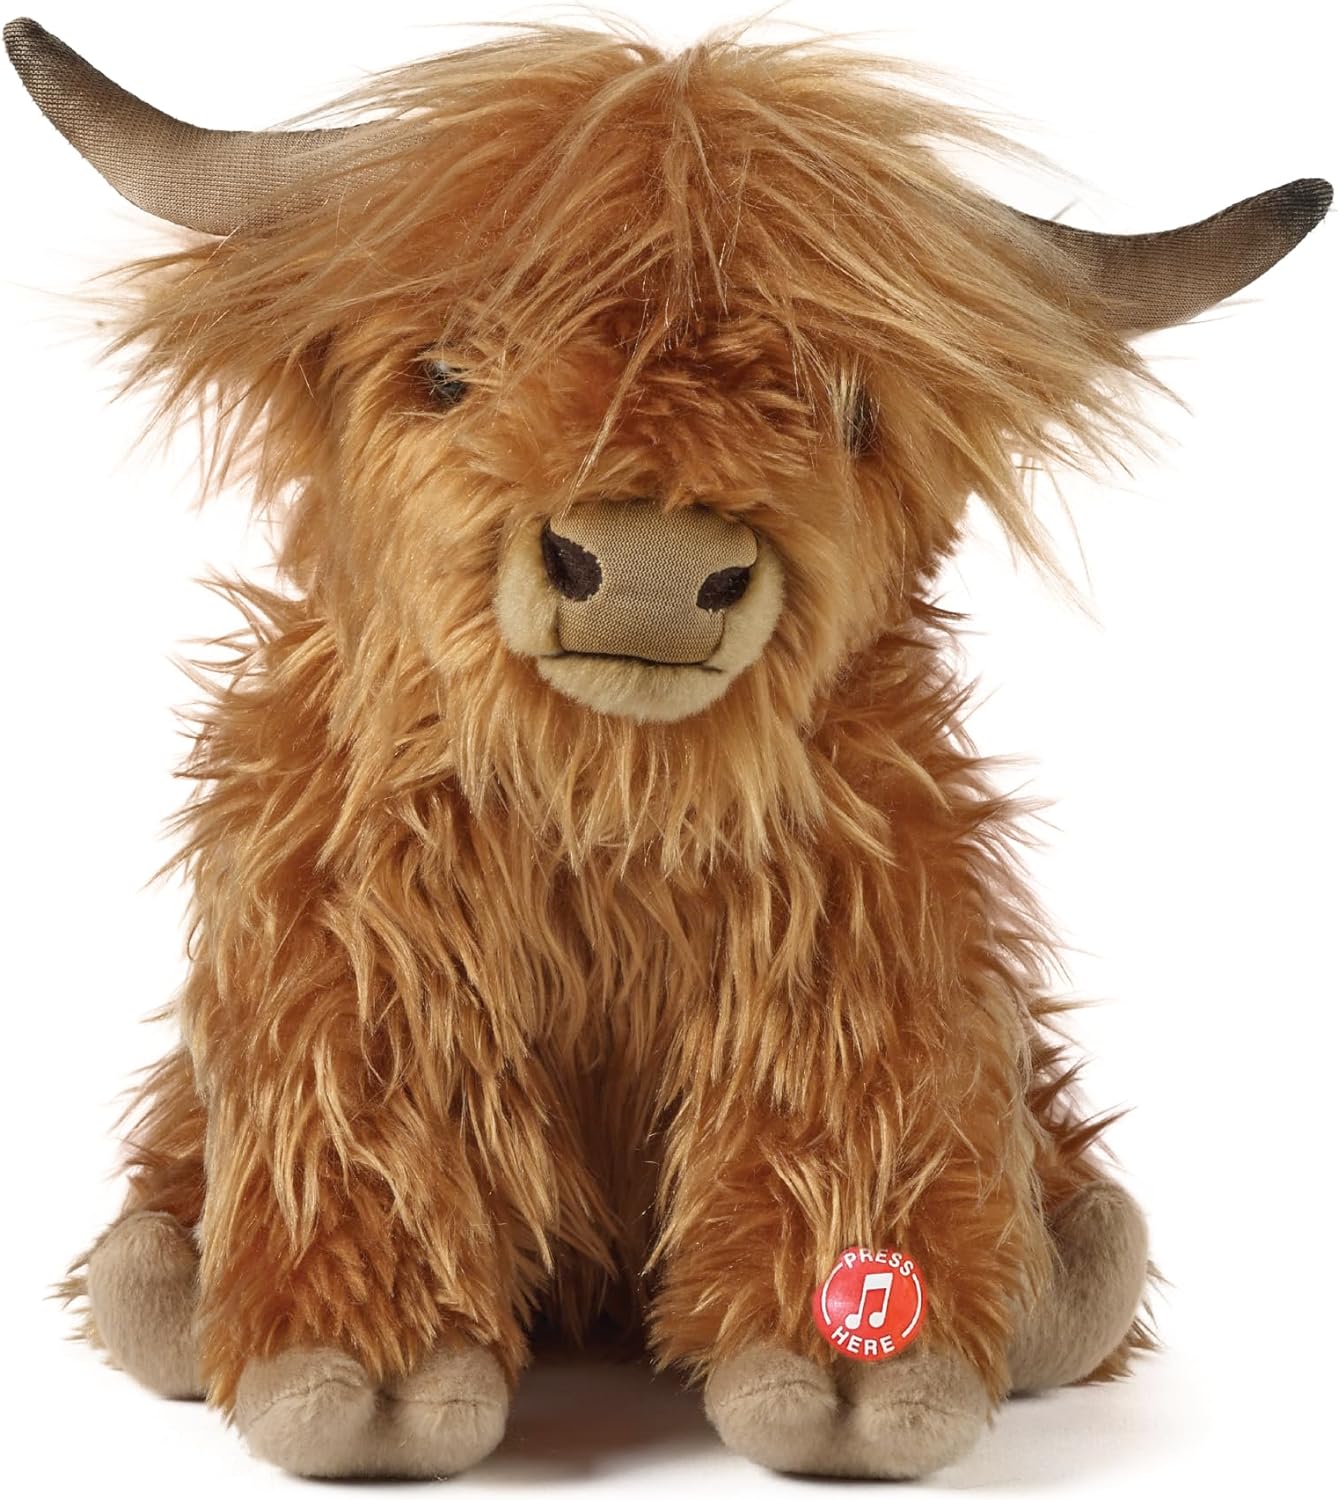 Living Nature Highland Cow Brown Stuffed Animal | Farm Toy with Sound | Soft Toy Gift for Kids | Naturli Eco-Friendly Plush | 9 Inches